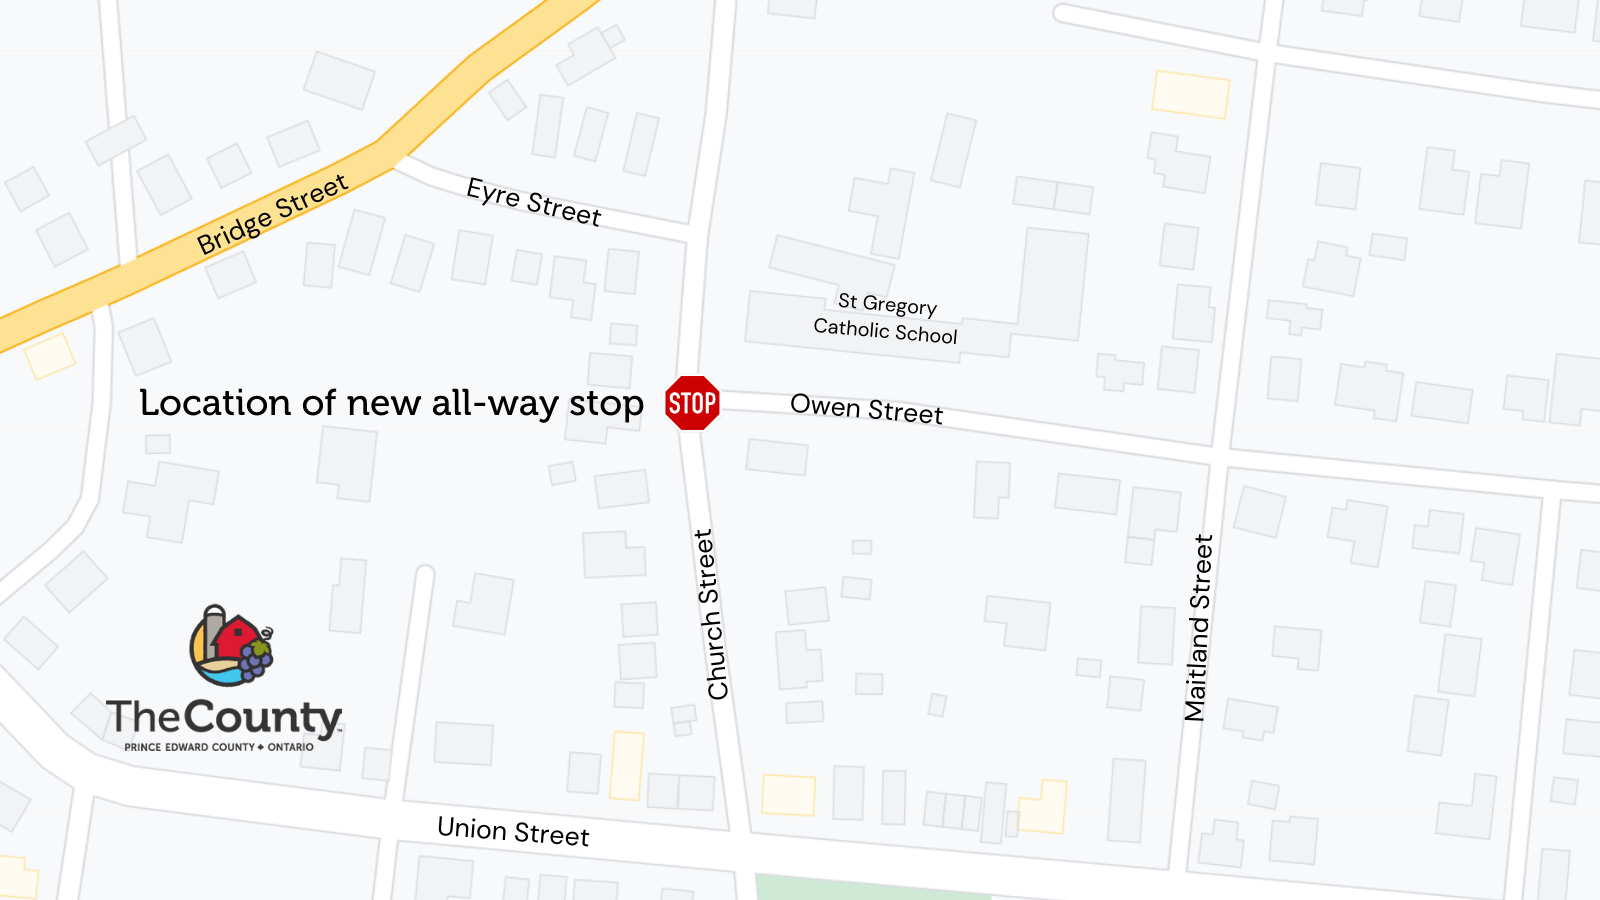 Map of the area around the intersection of Church and Owen Streets depicting the location of the all-way stop.